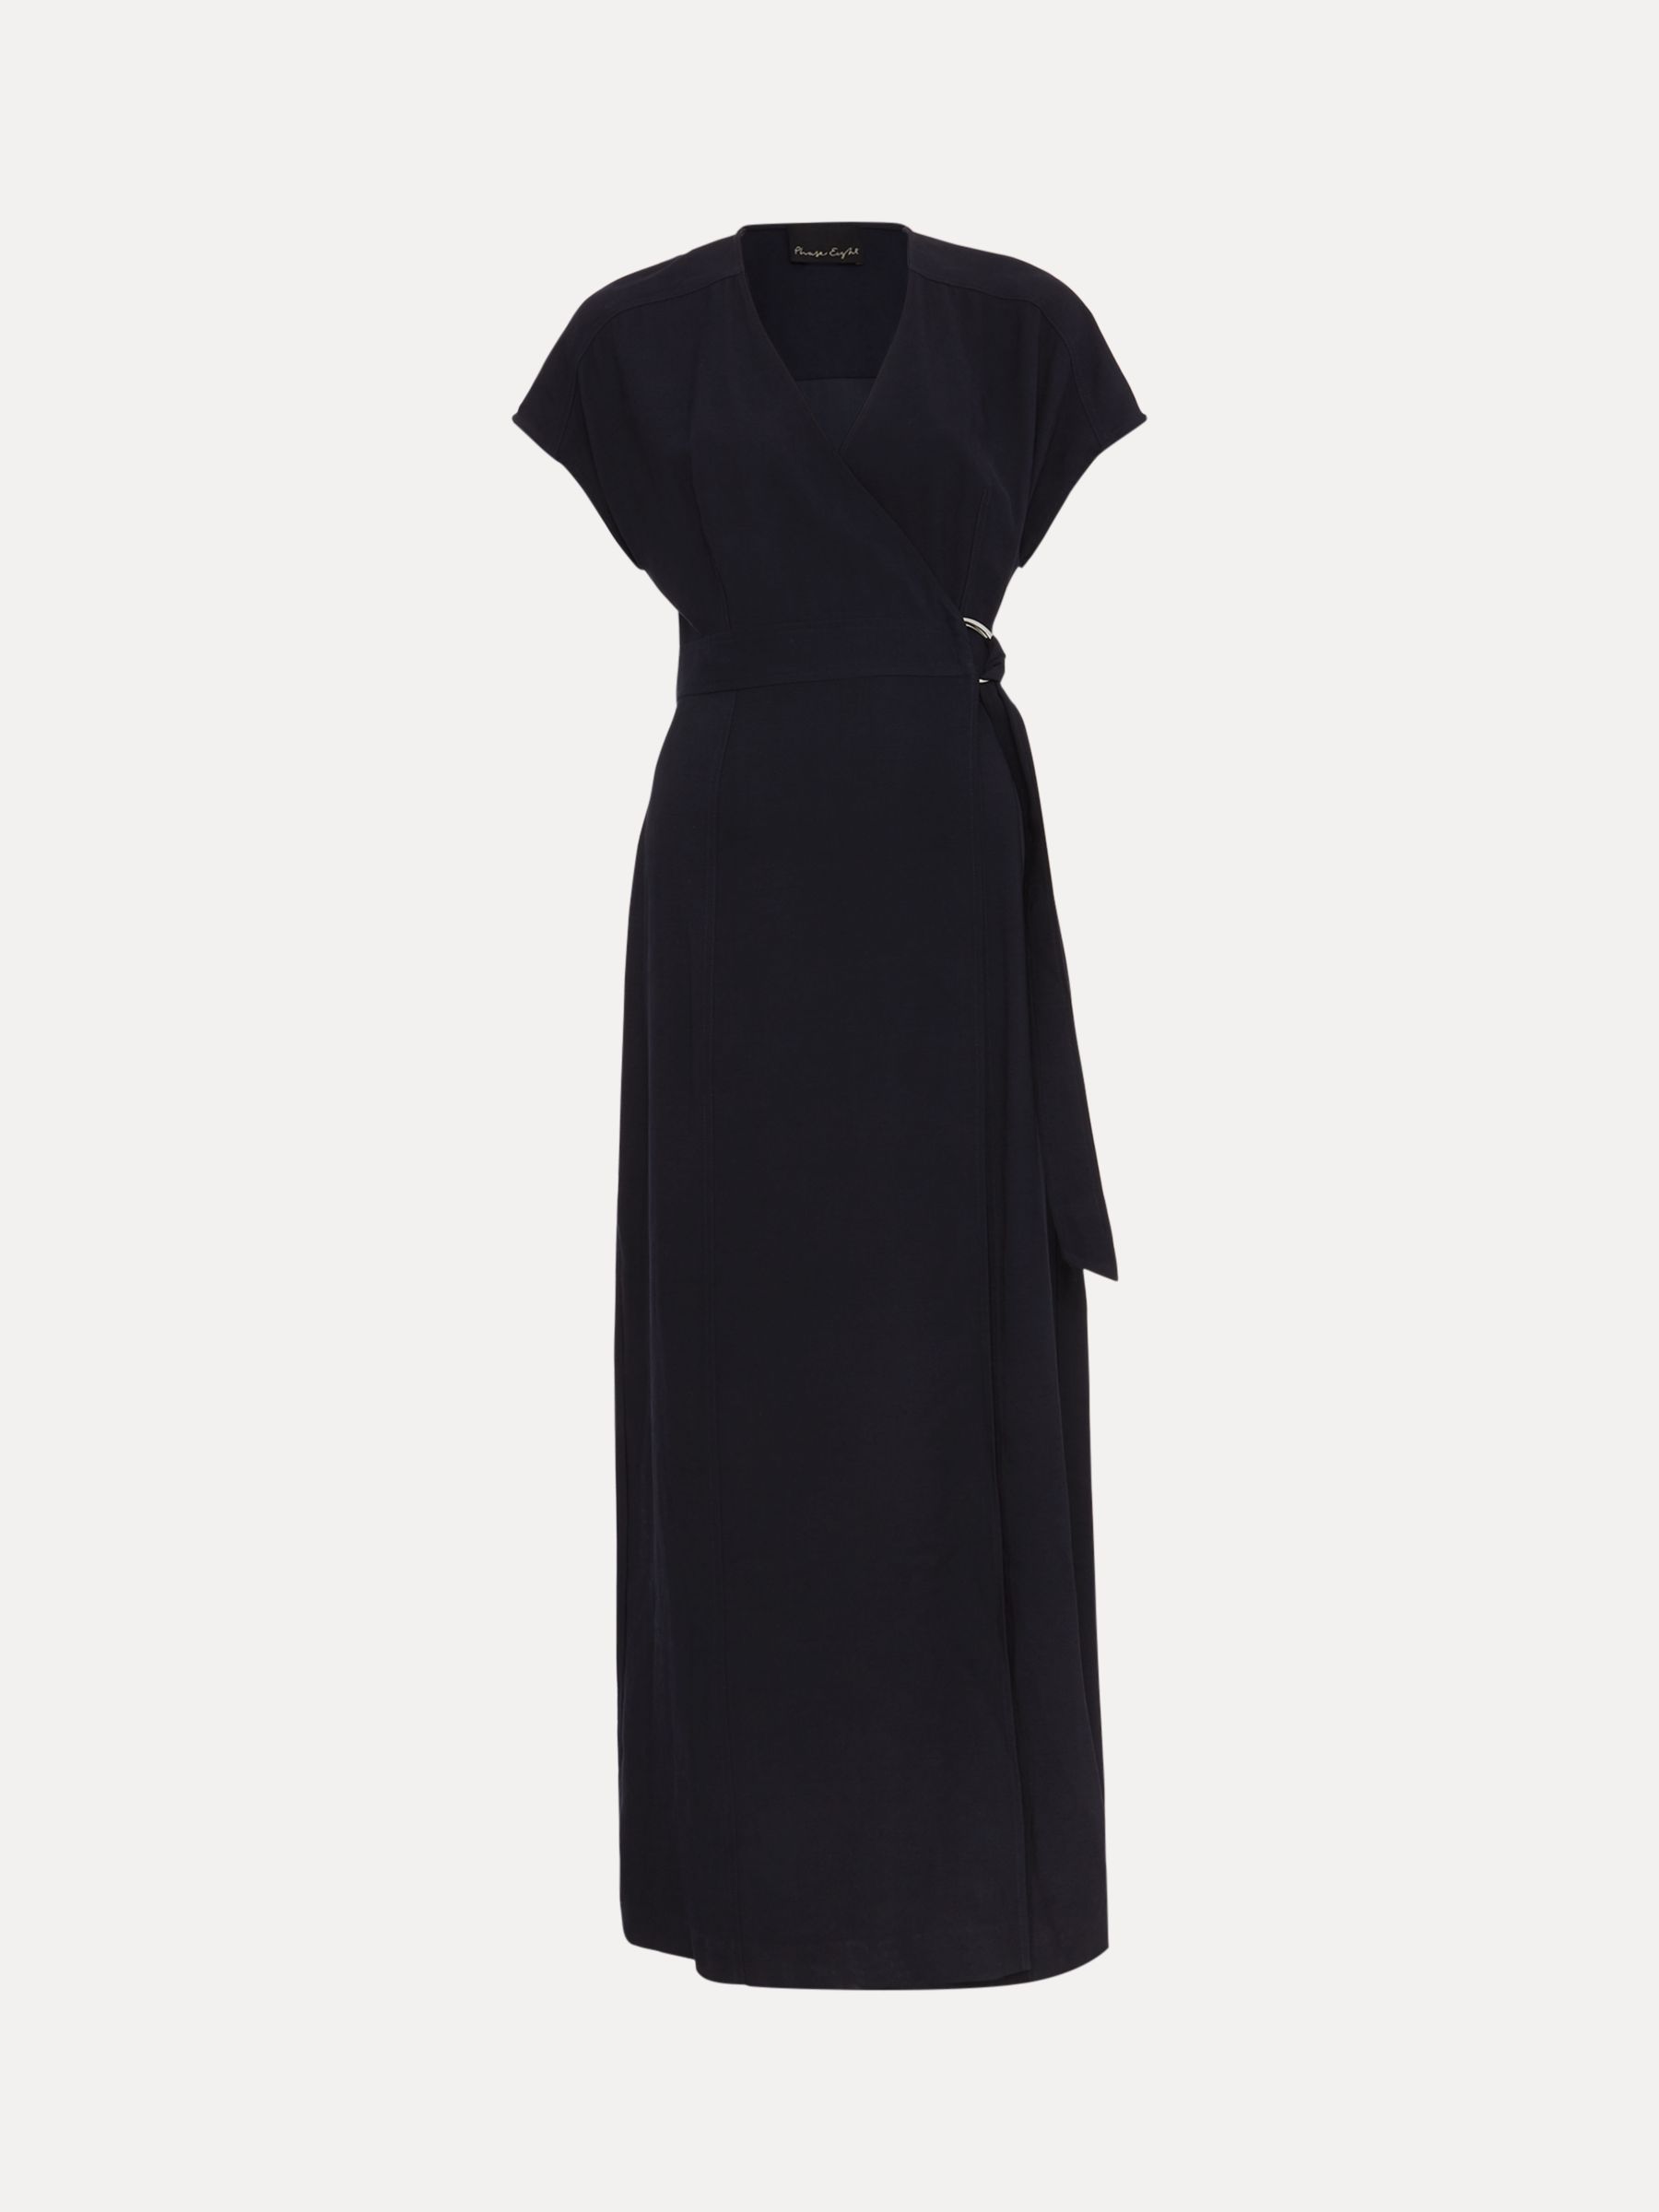 Buy Phase Eight Liv Ecovero Wrap Maxi Dress, Navy Online at johnlewis.com